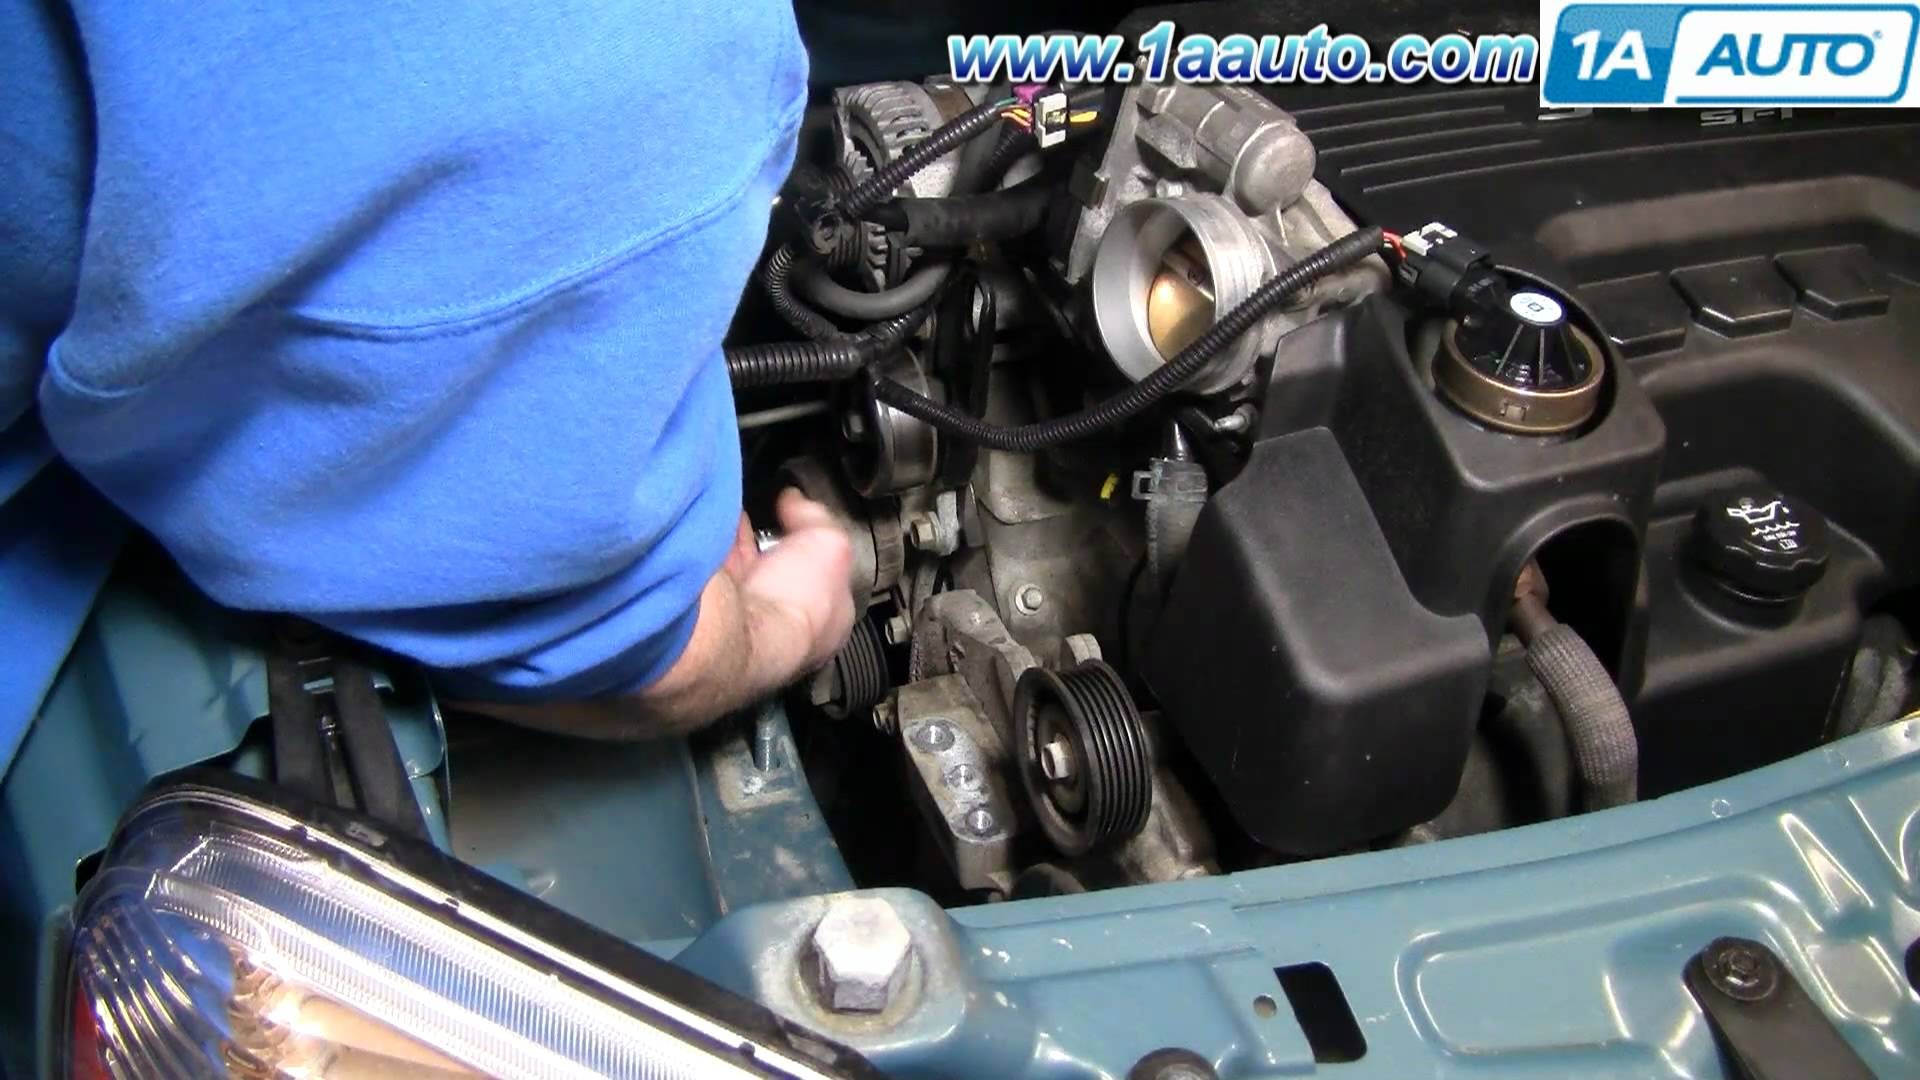 2006 Pontiac torrent Engine Diagram How to Install Replace Serpentine Belt Tensioner Chevy Equinox 3 4l Of 2006 Pontiac torrent Engine Diagram